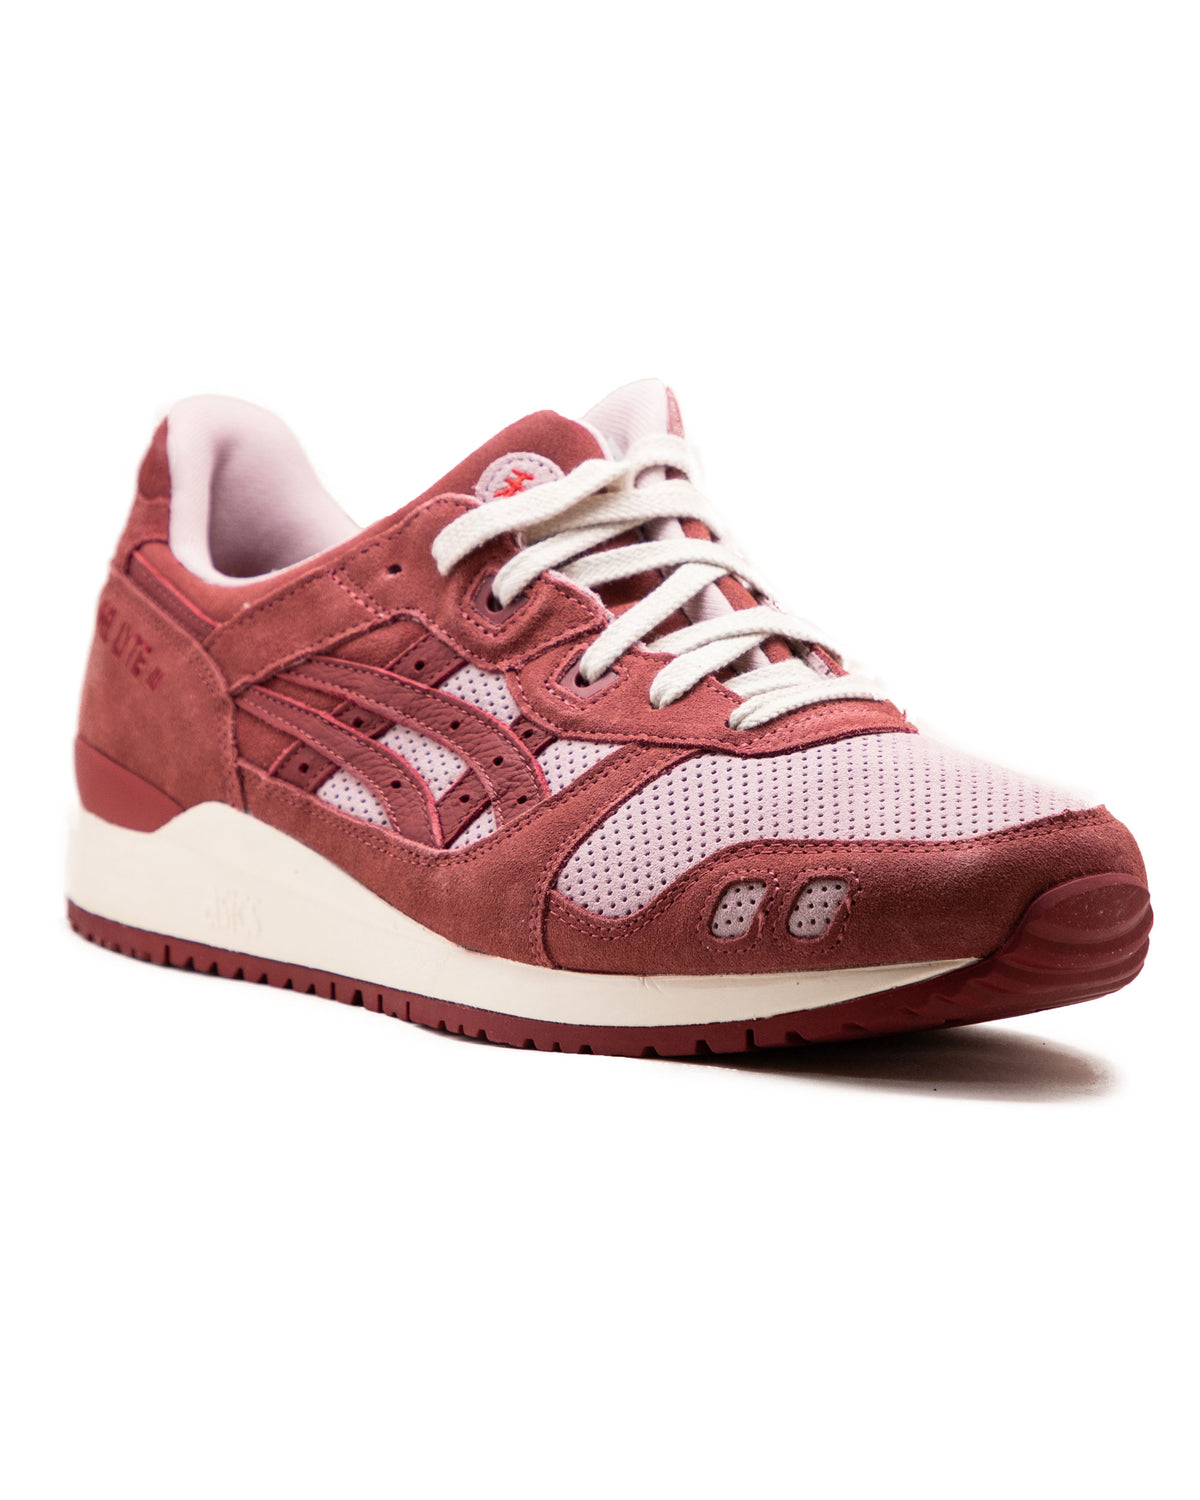 ASICS Gel-Lyte III OG Changing of the Seasons Pack Fall Watershed Rose/Beet Red